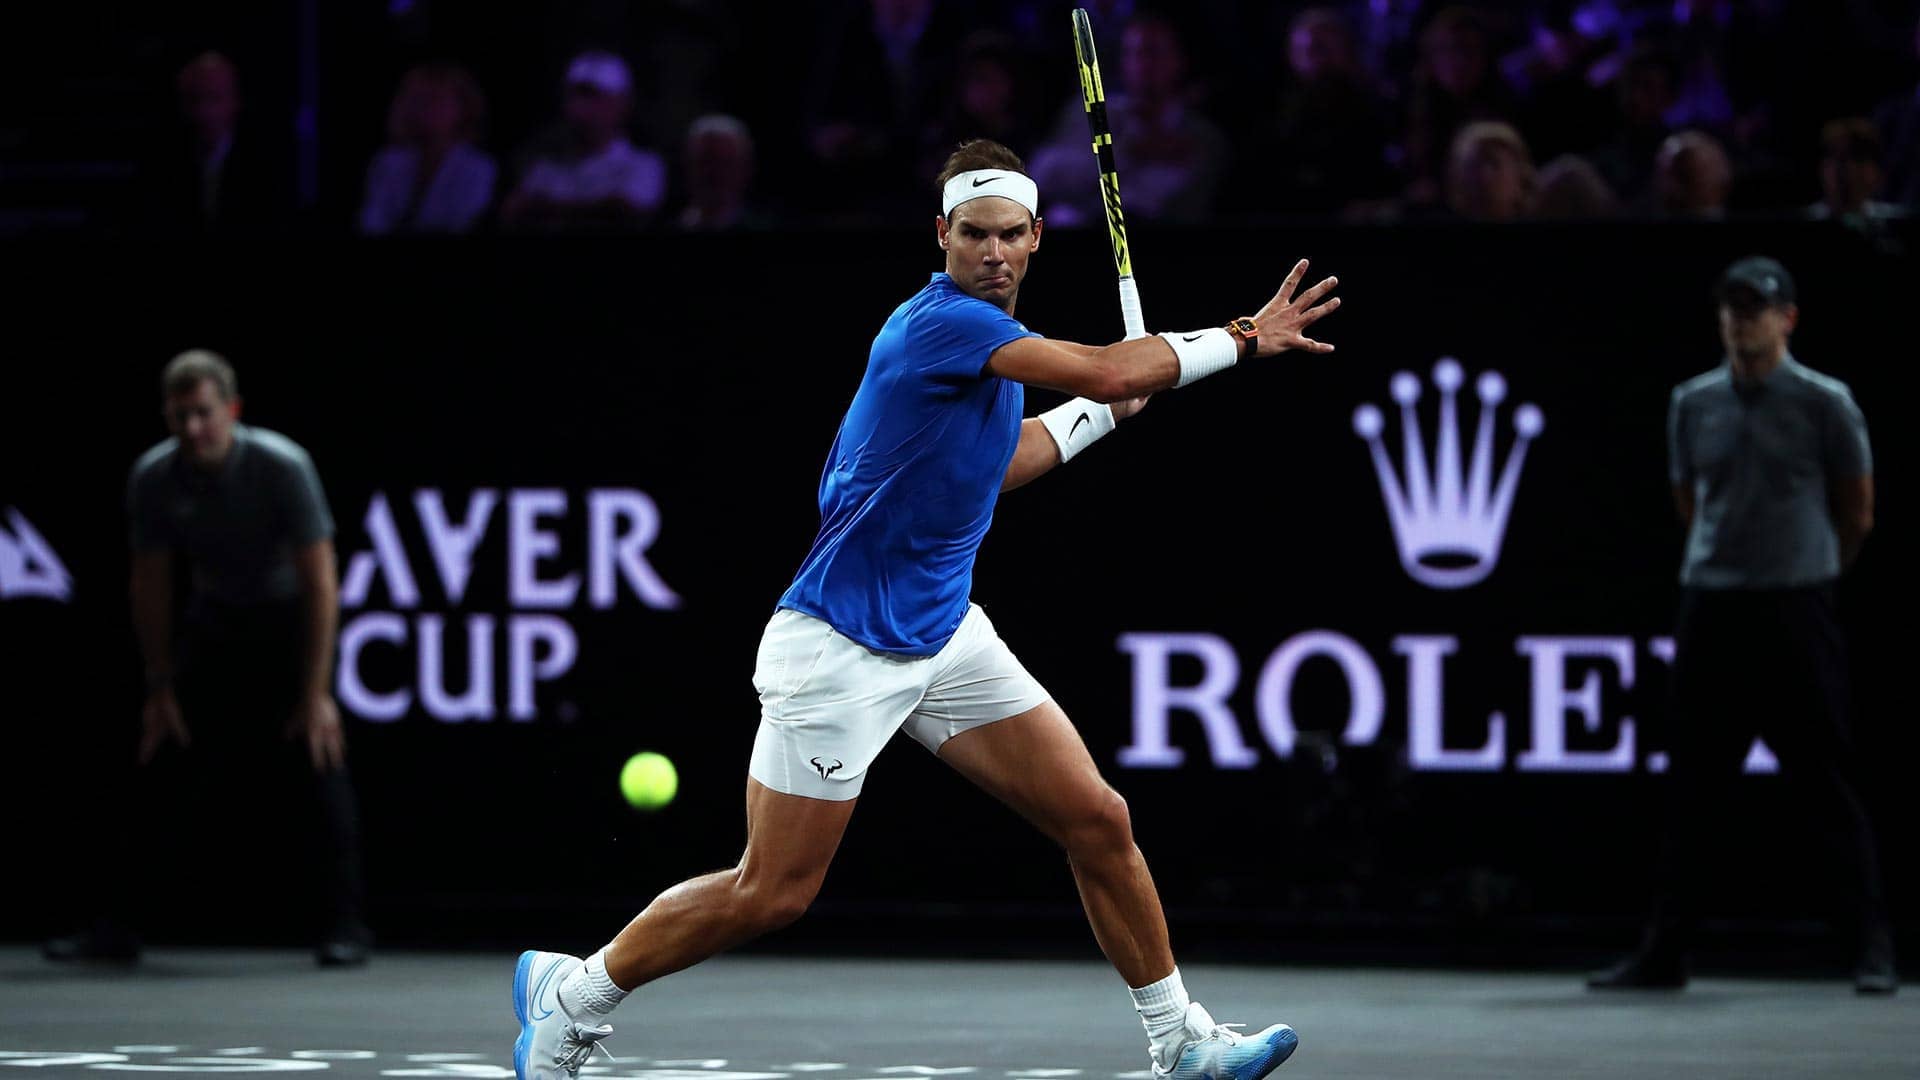 Rafael Nadal will represent Team Europe at this year's Laver Cup.